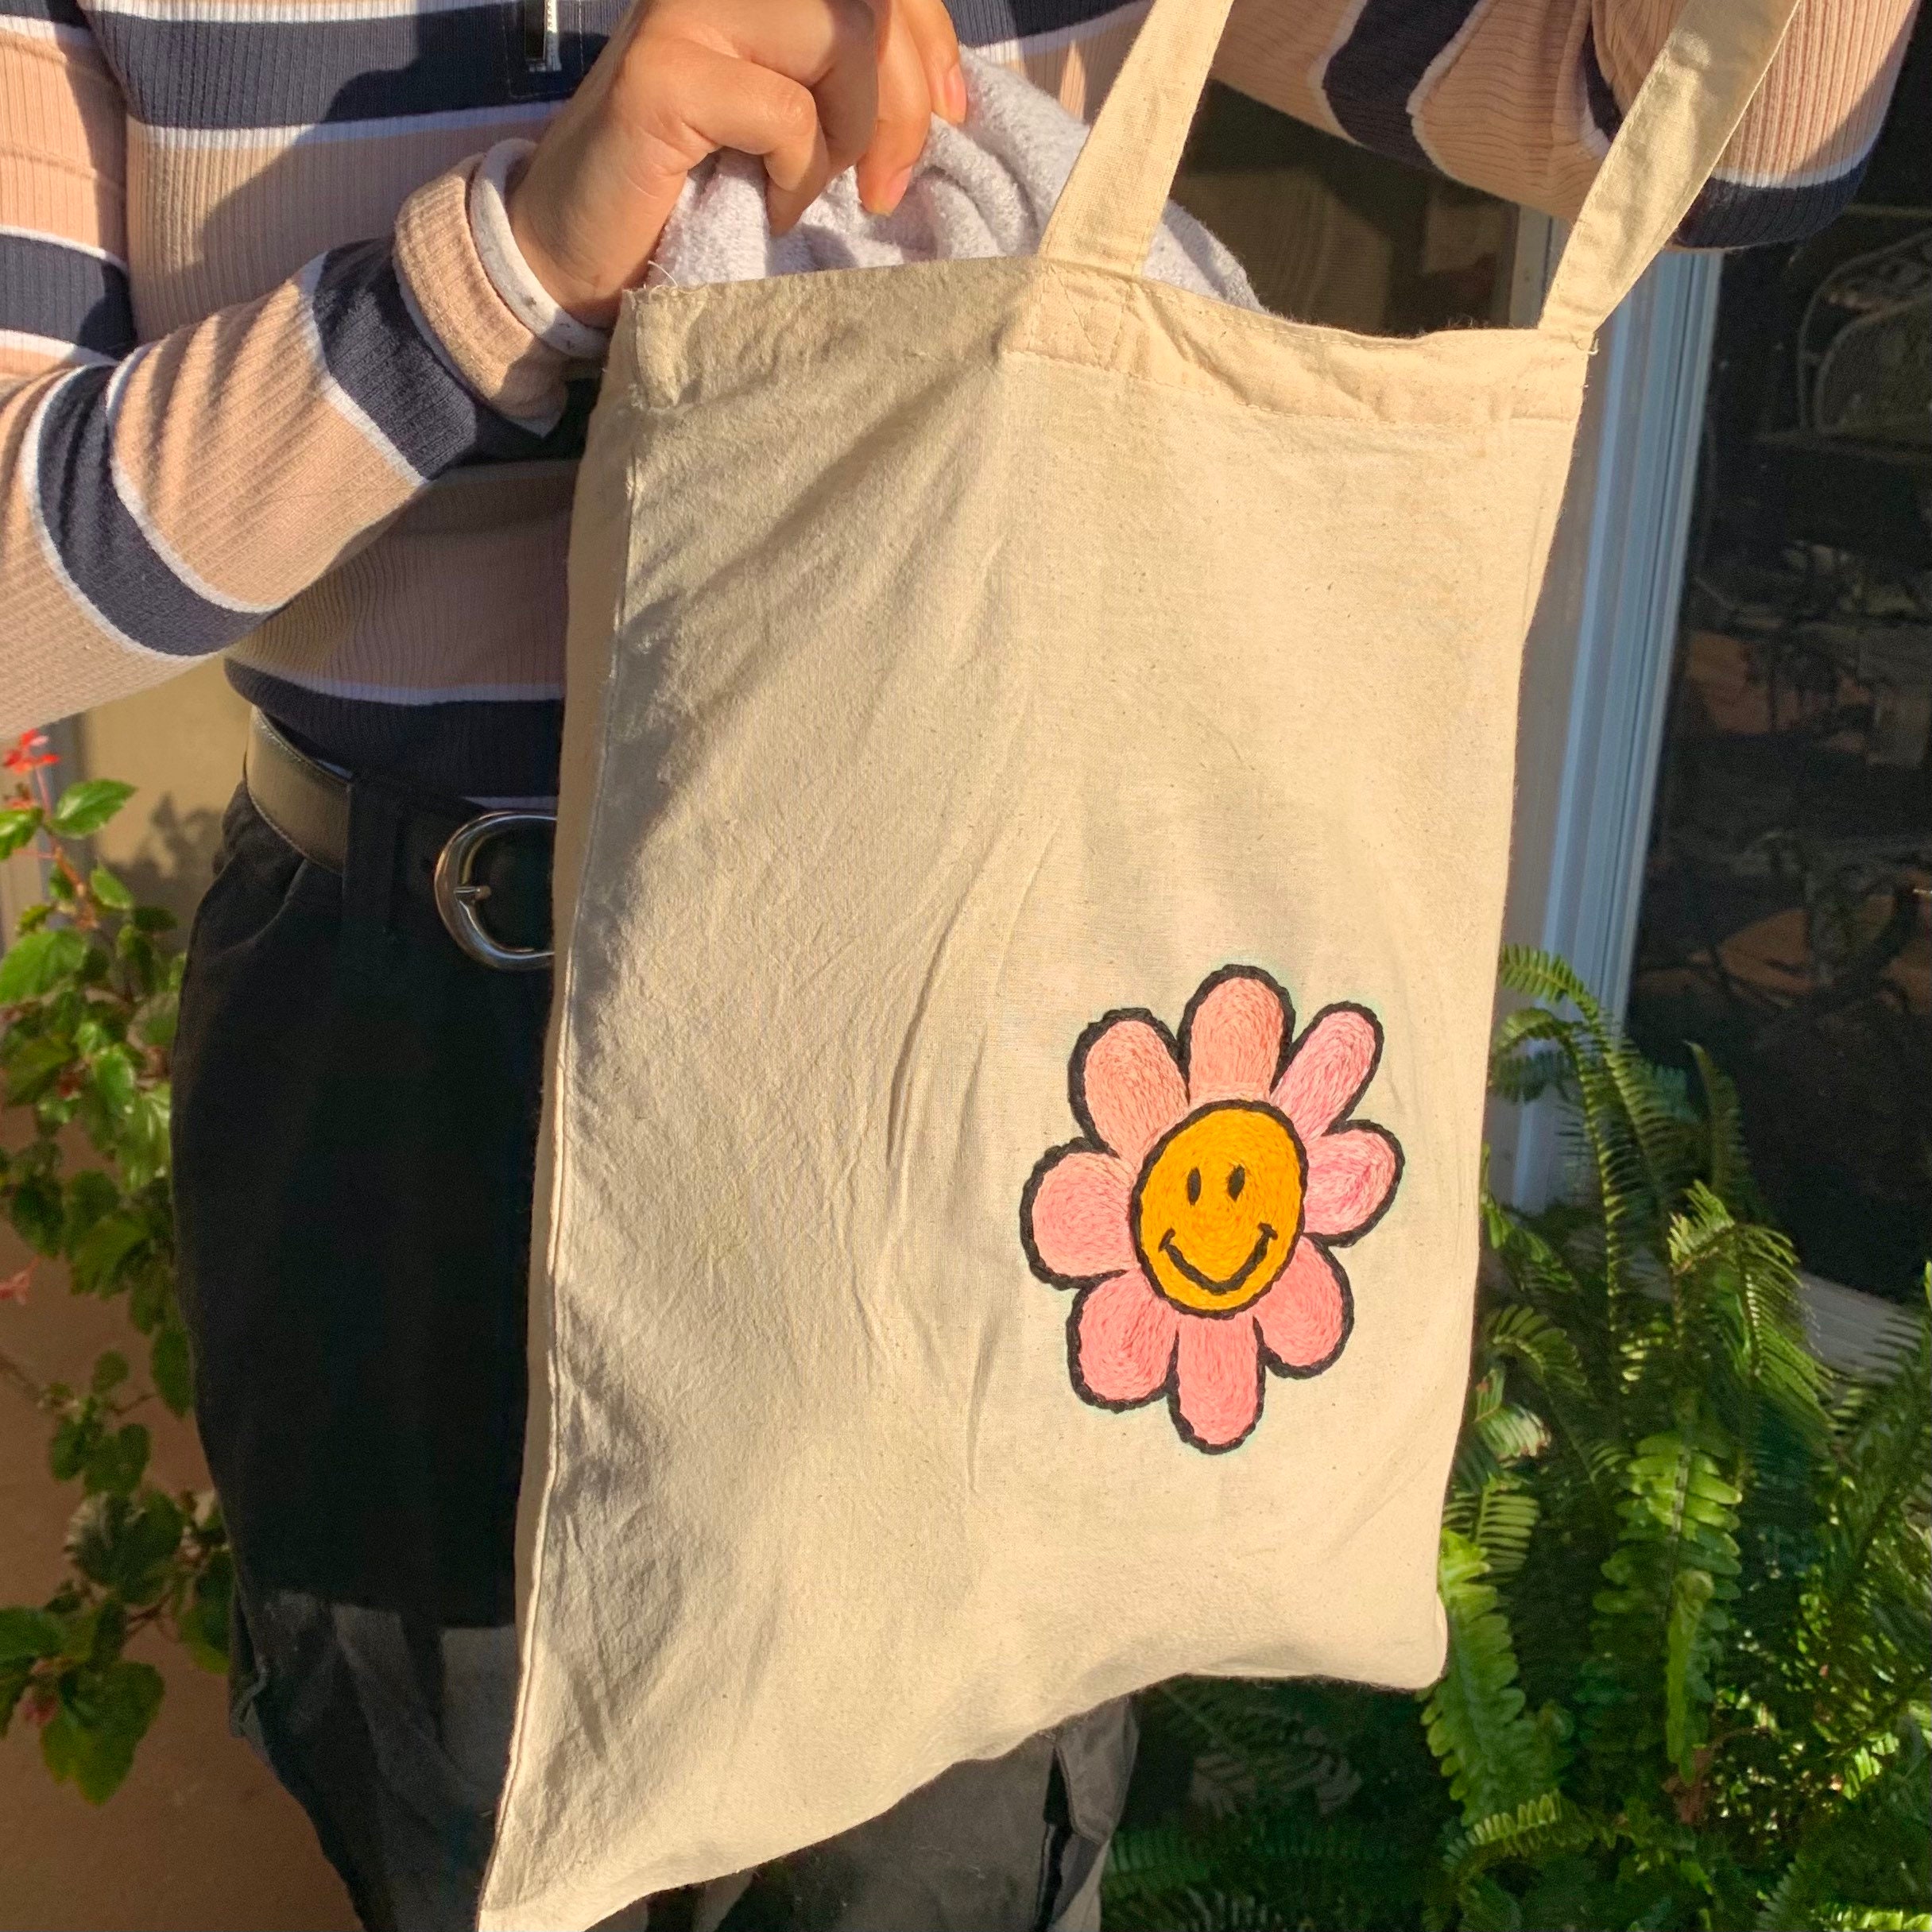 Pink Flower With Smiley Face Tote Bag. Hand Embroidered: - Etsy